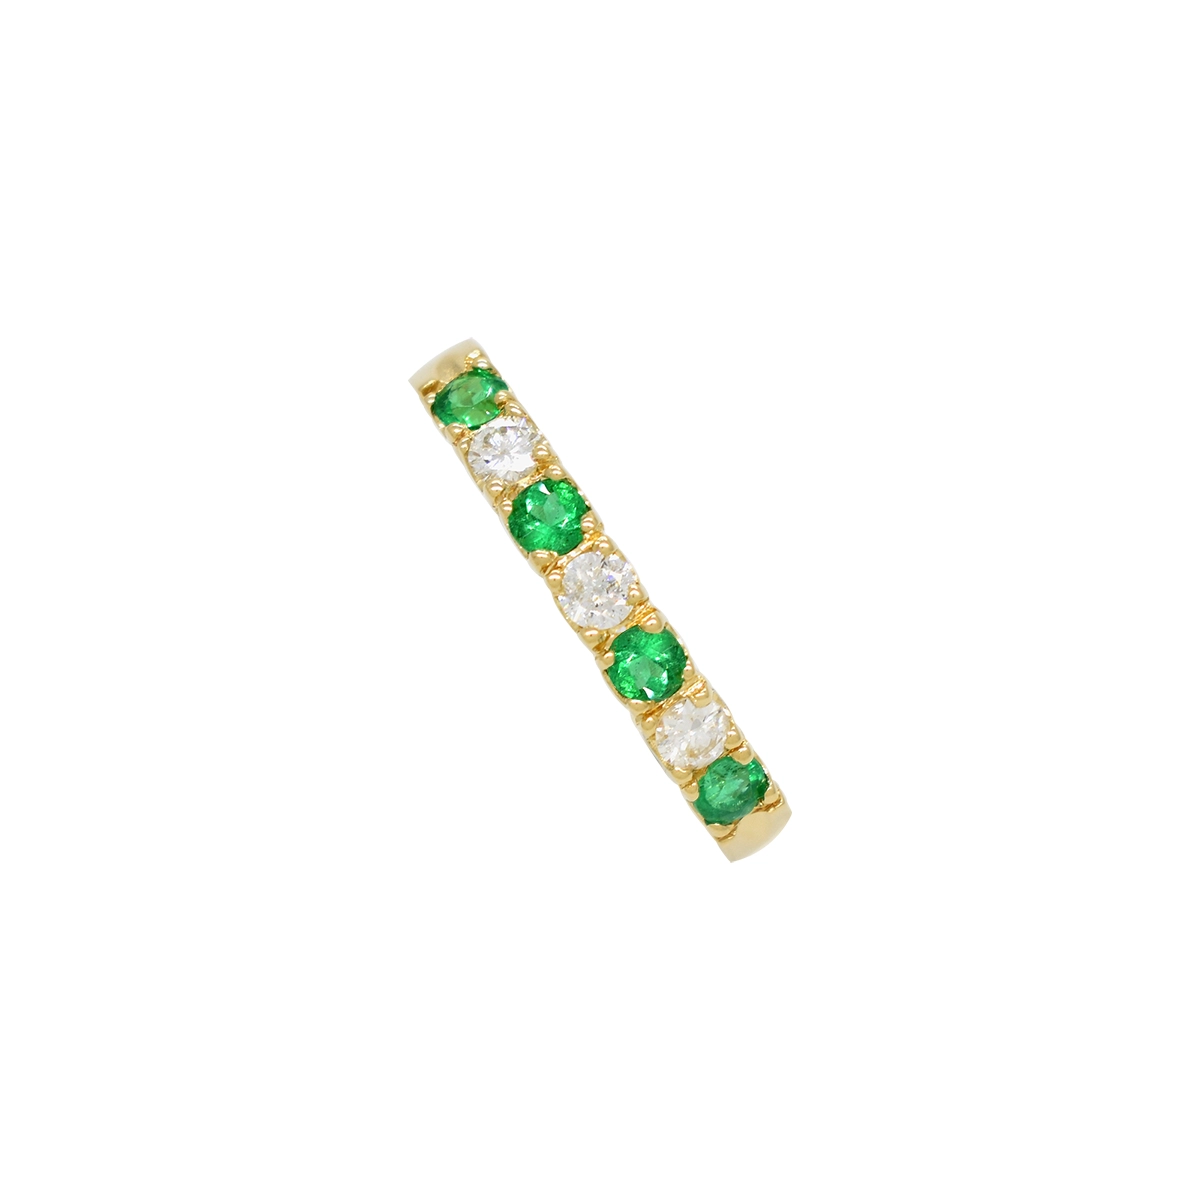 This wedding band ring features round cut emeralds and diamonds that are 2.6 millimeters in diameter, the band is 3 millimeters wide